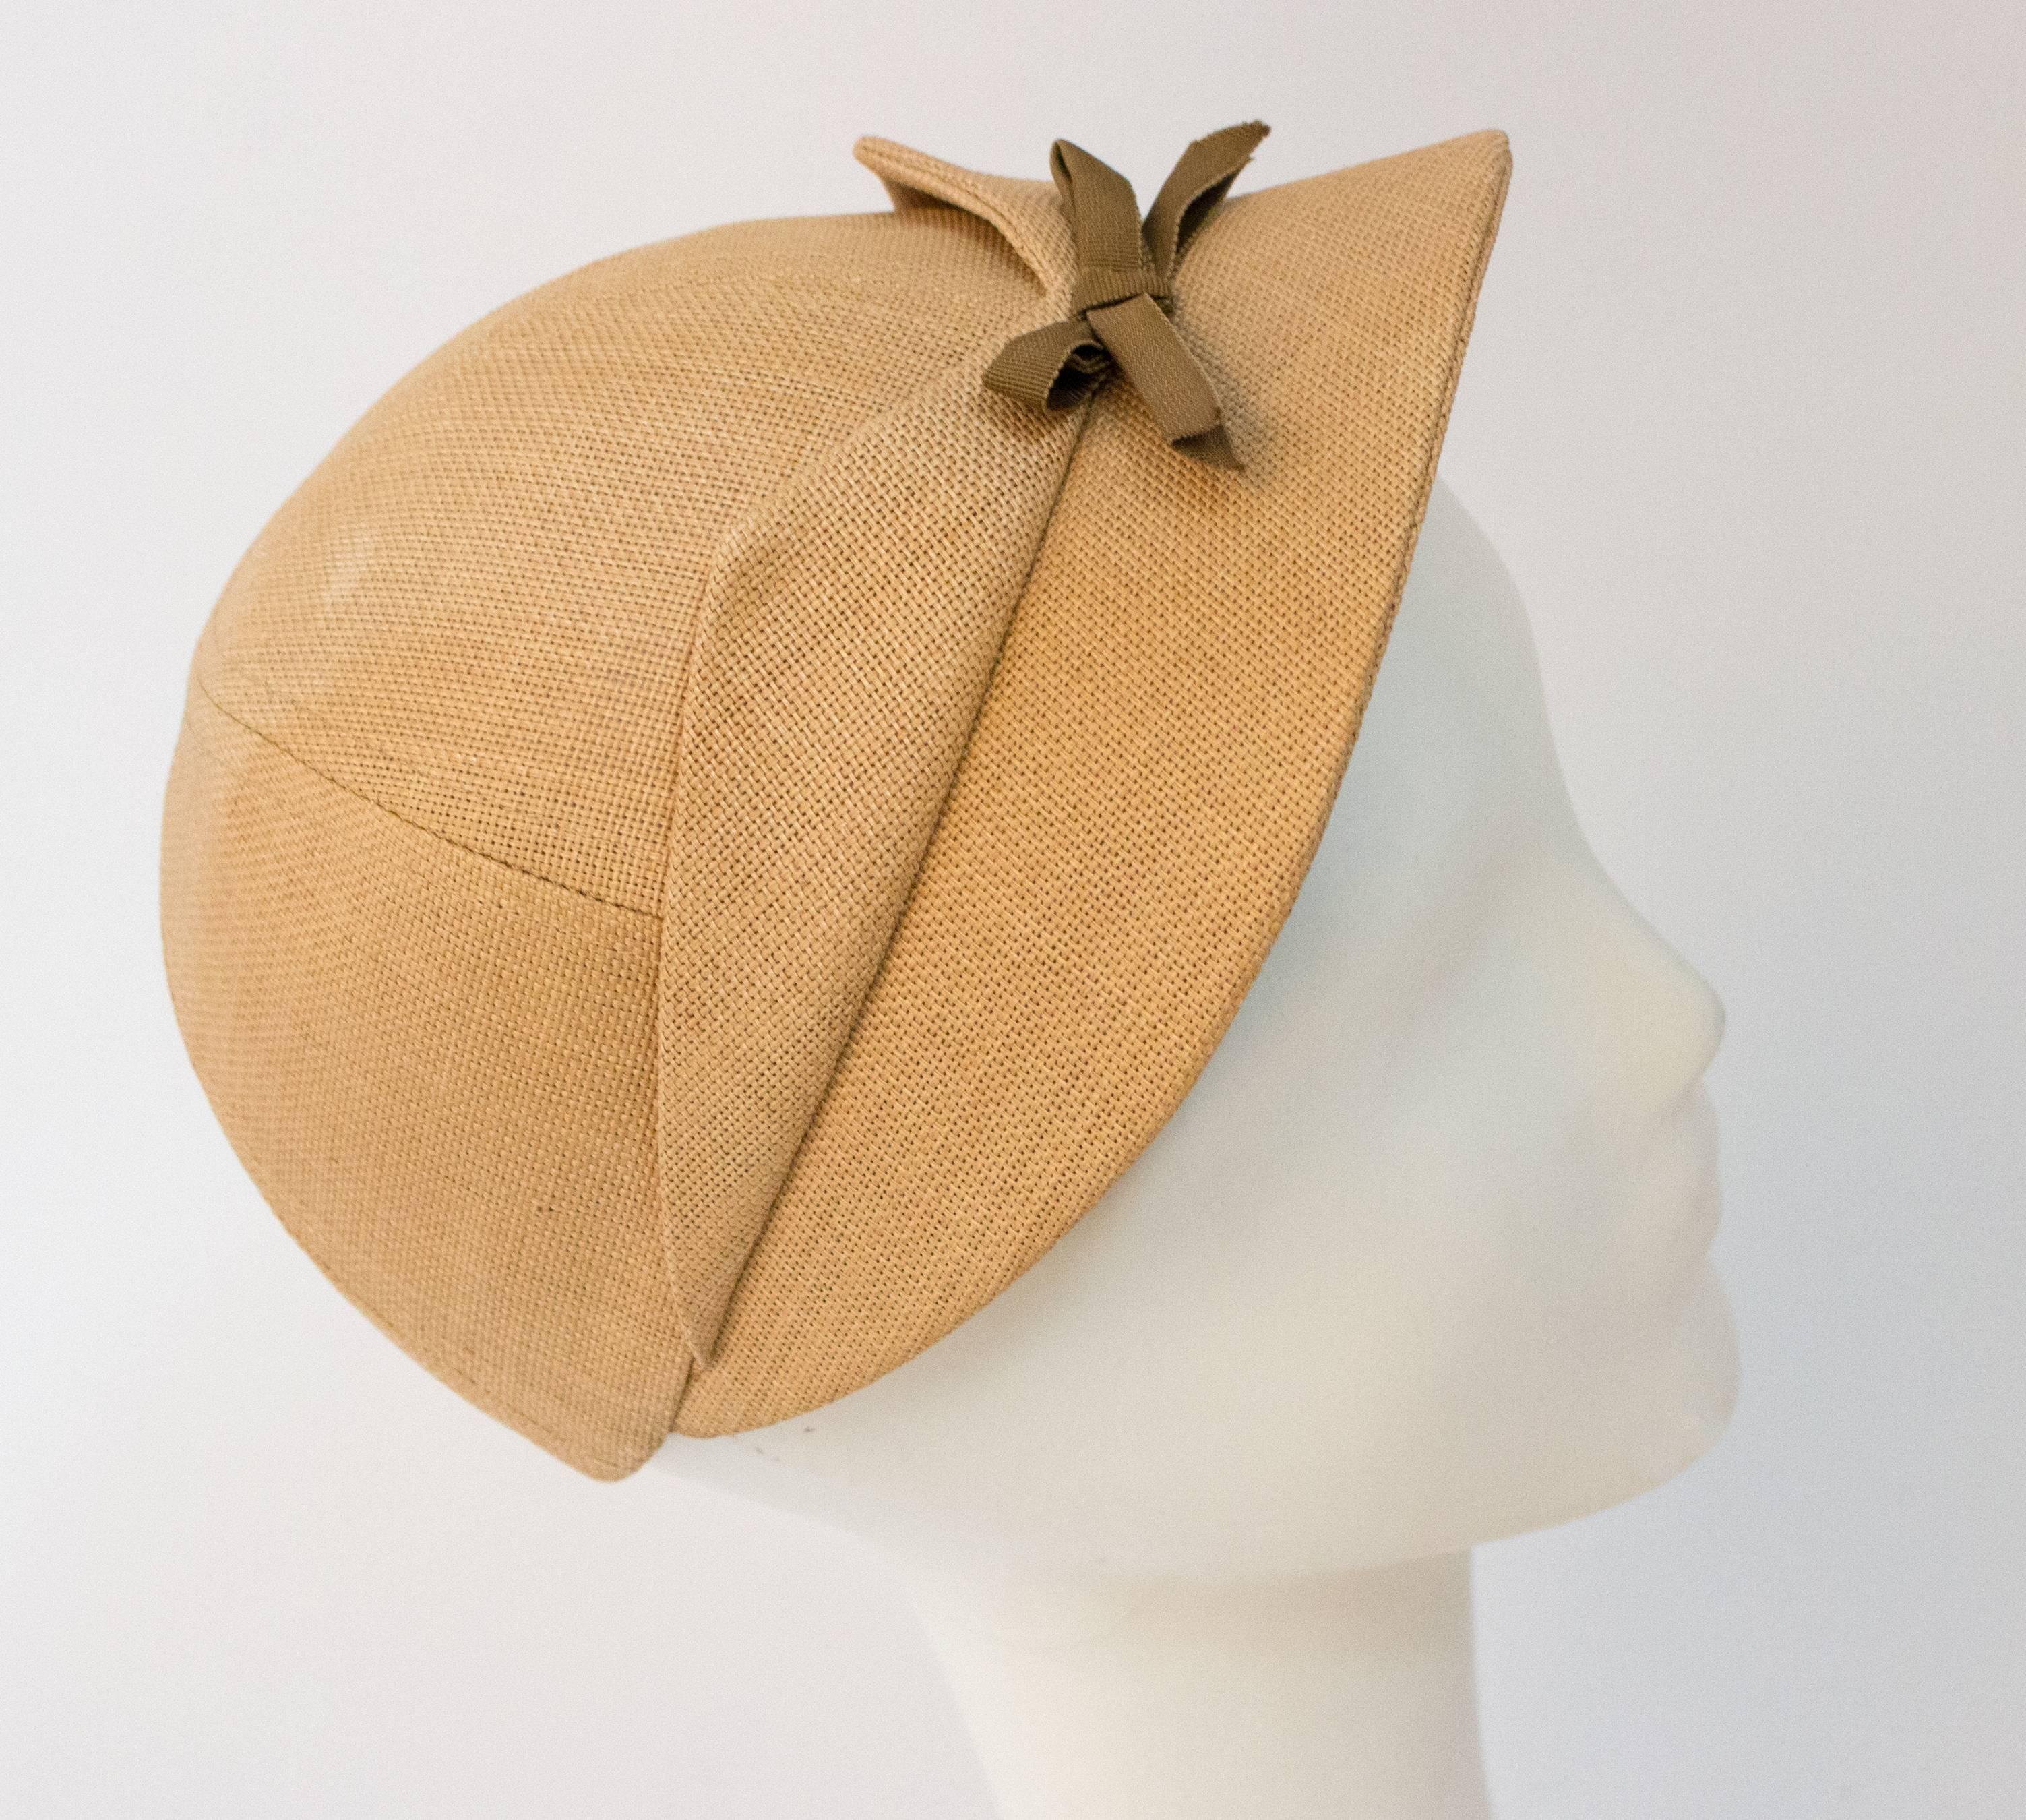 40s Straw Women's Sports Cap. Vintage vintage baseball cap with bow detail.